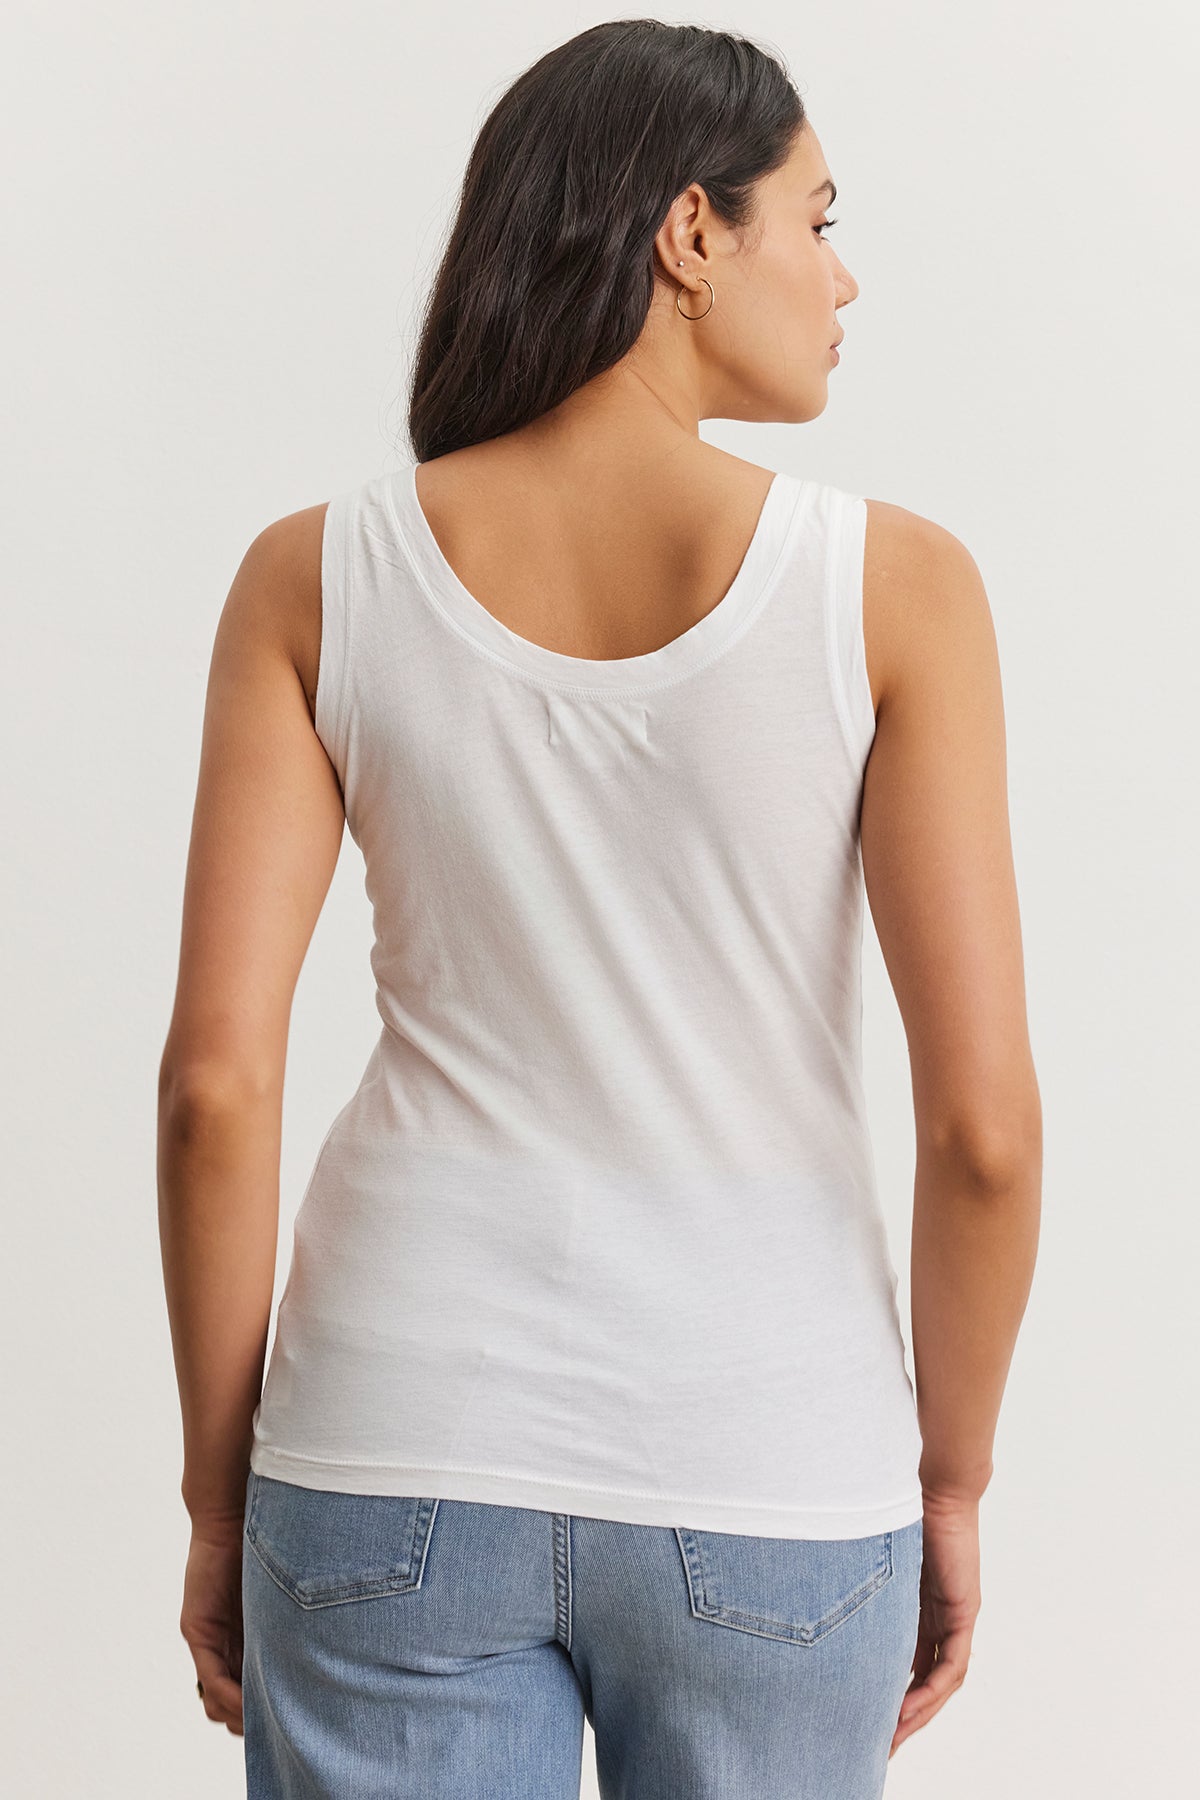   A woman with long dark hair is standing with her back to the camera, wearing a white fitted MOSSY TANK TOP by Velvet by Graham & Spencer and blue jeans, showcasing a versatile wardrobe. 